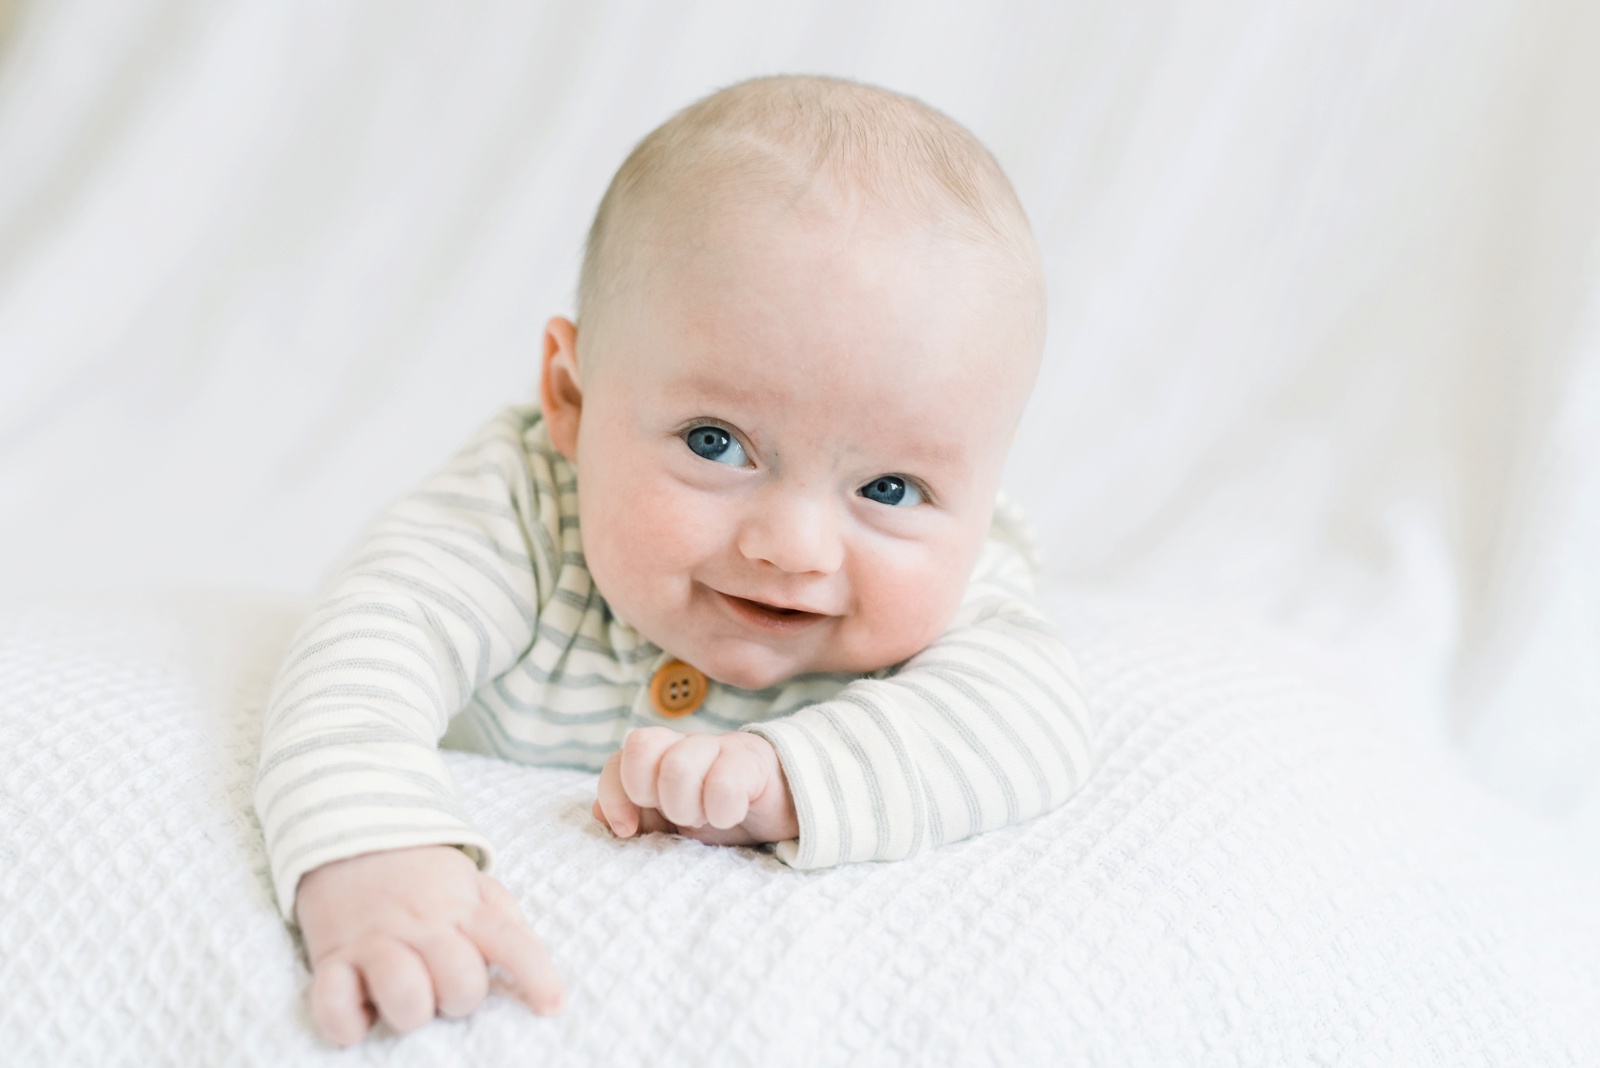 sweet-baby-james-allen-4-and-5-months-old-photo_7539.jpg